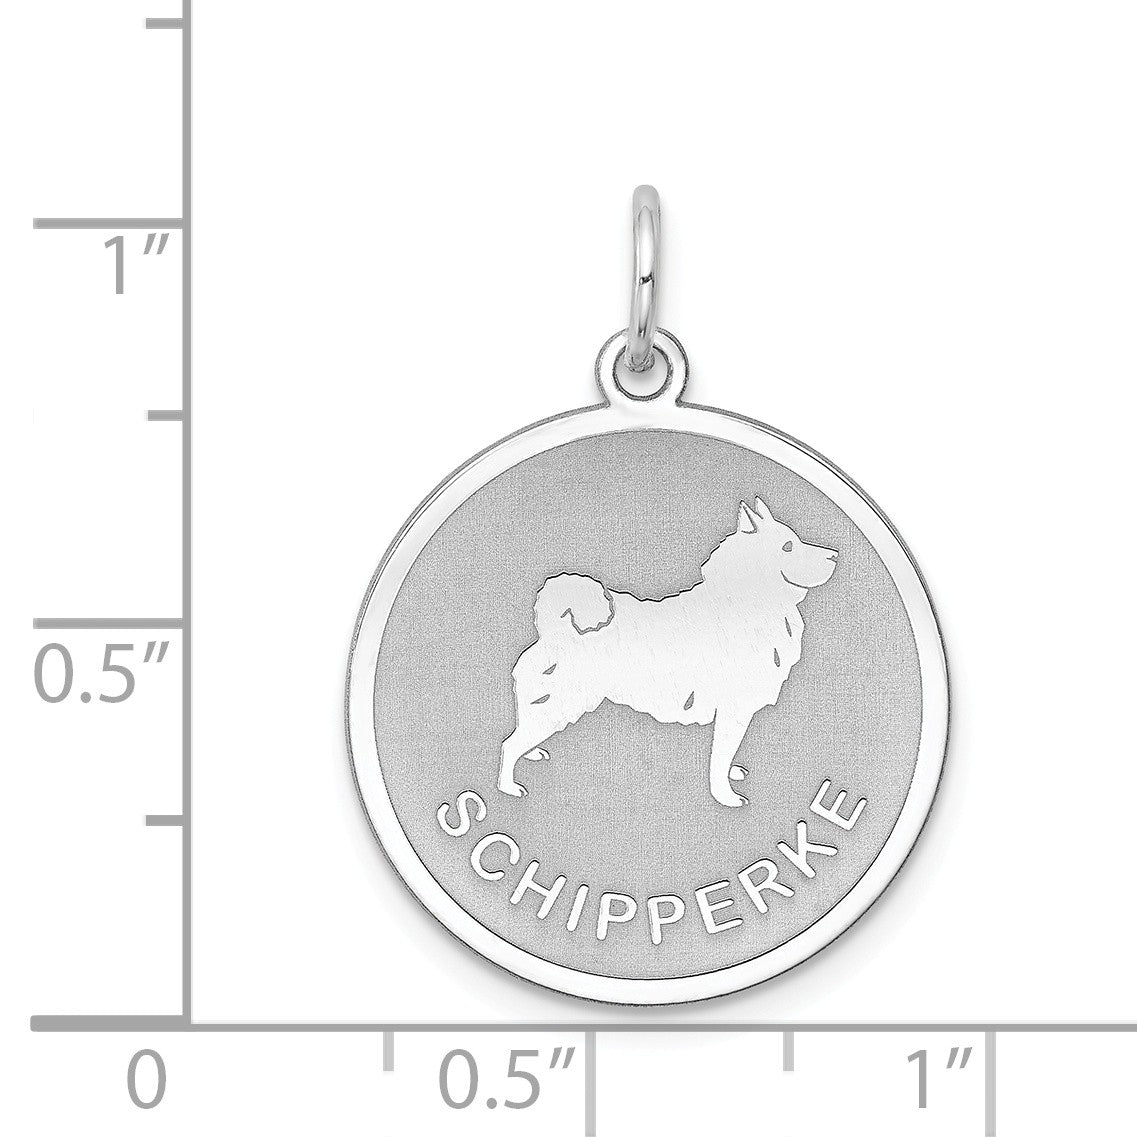 Alternate view of the Sterling Silver Laser Etched Schipperke Dog Pendant, 19mm by The Black Bow Jewelry Co.